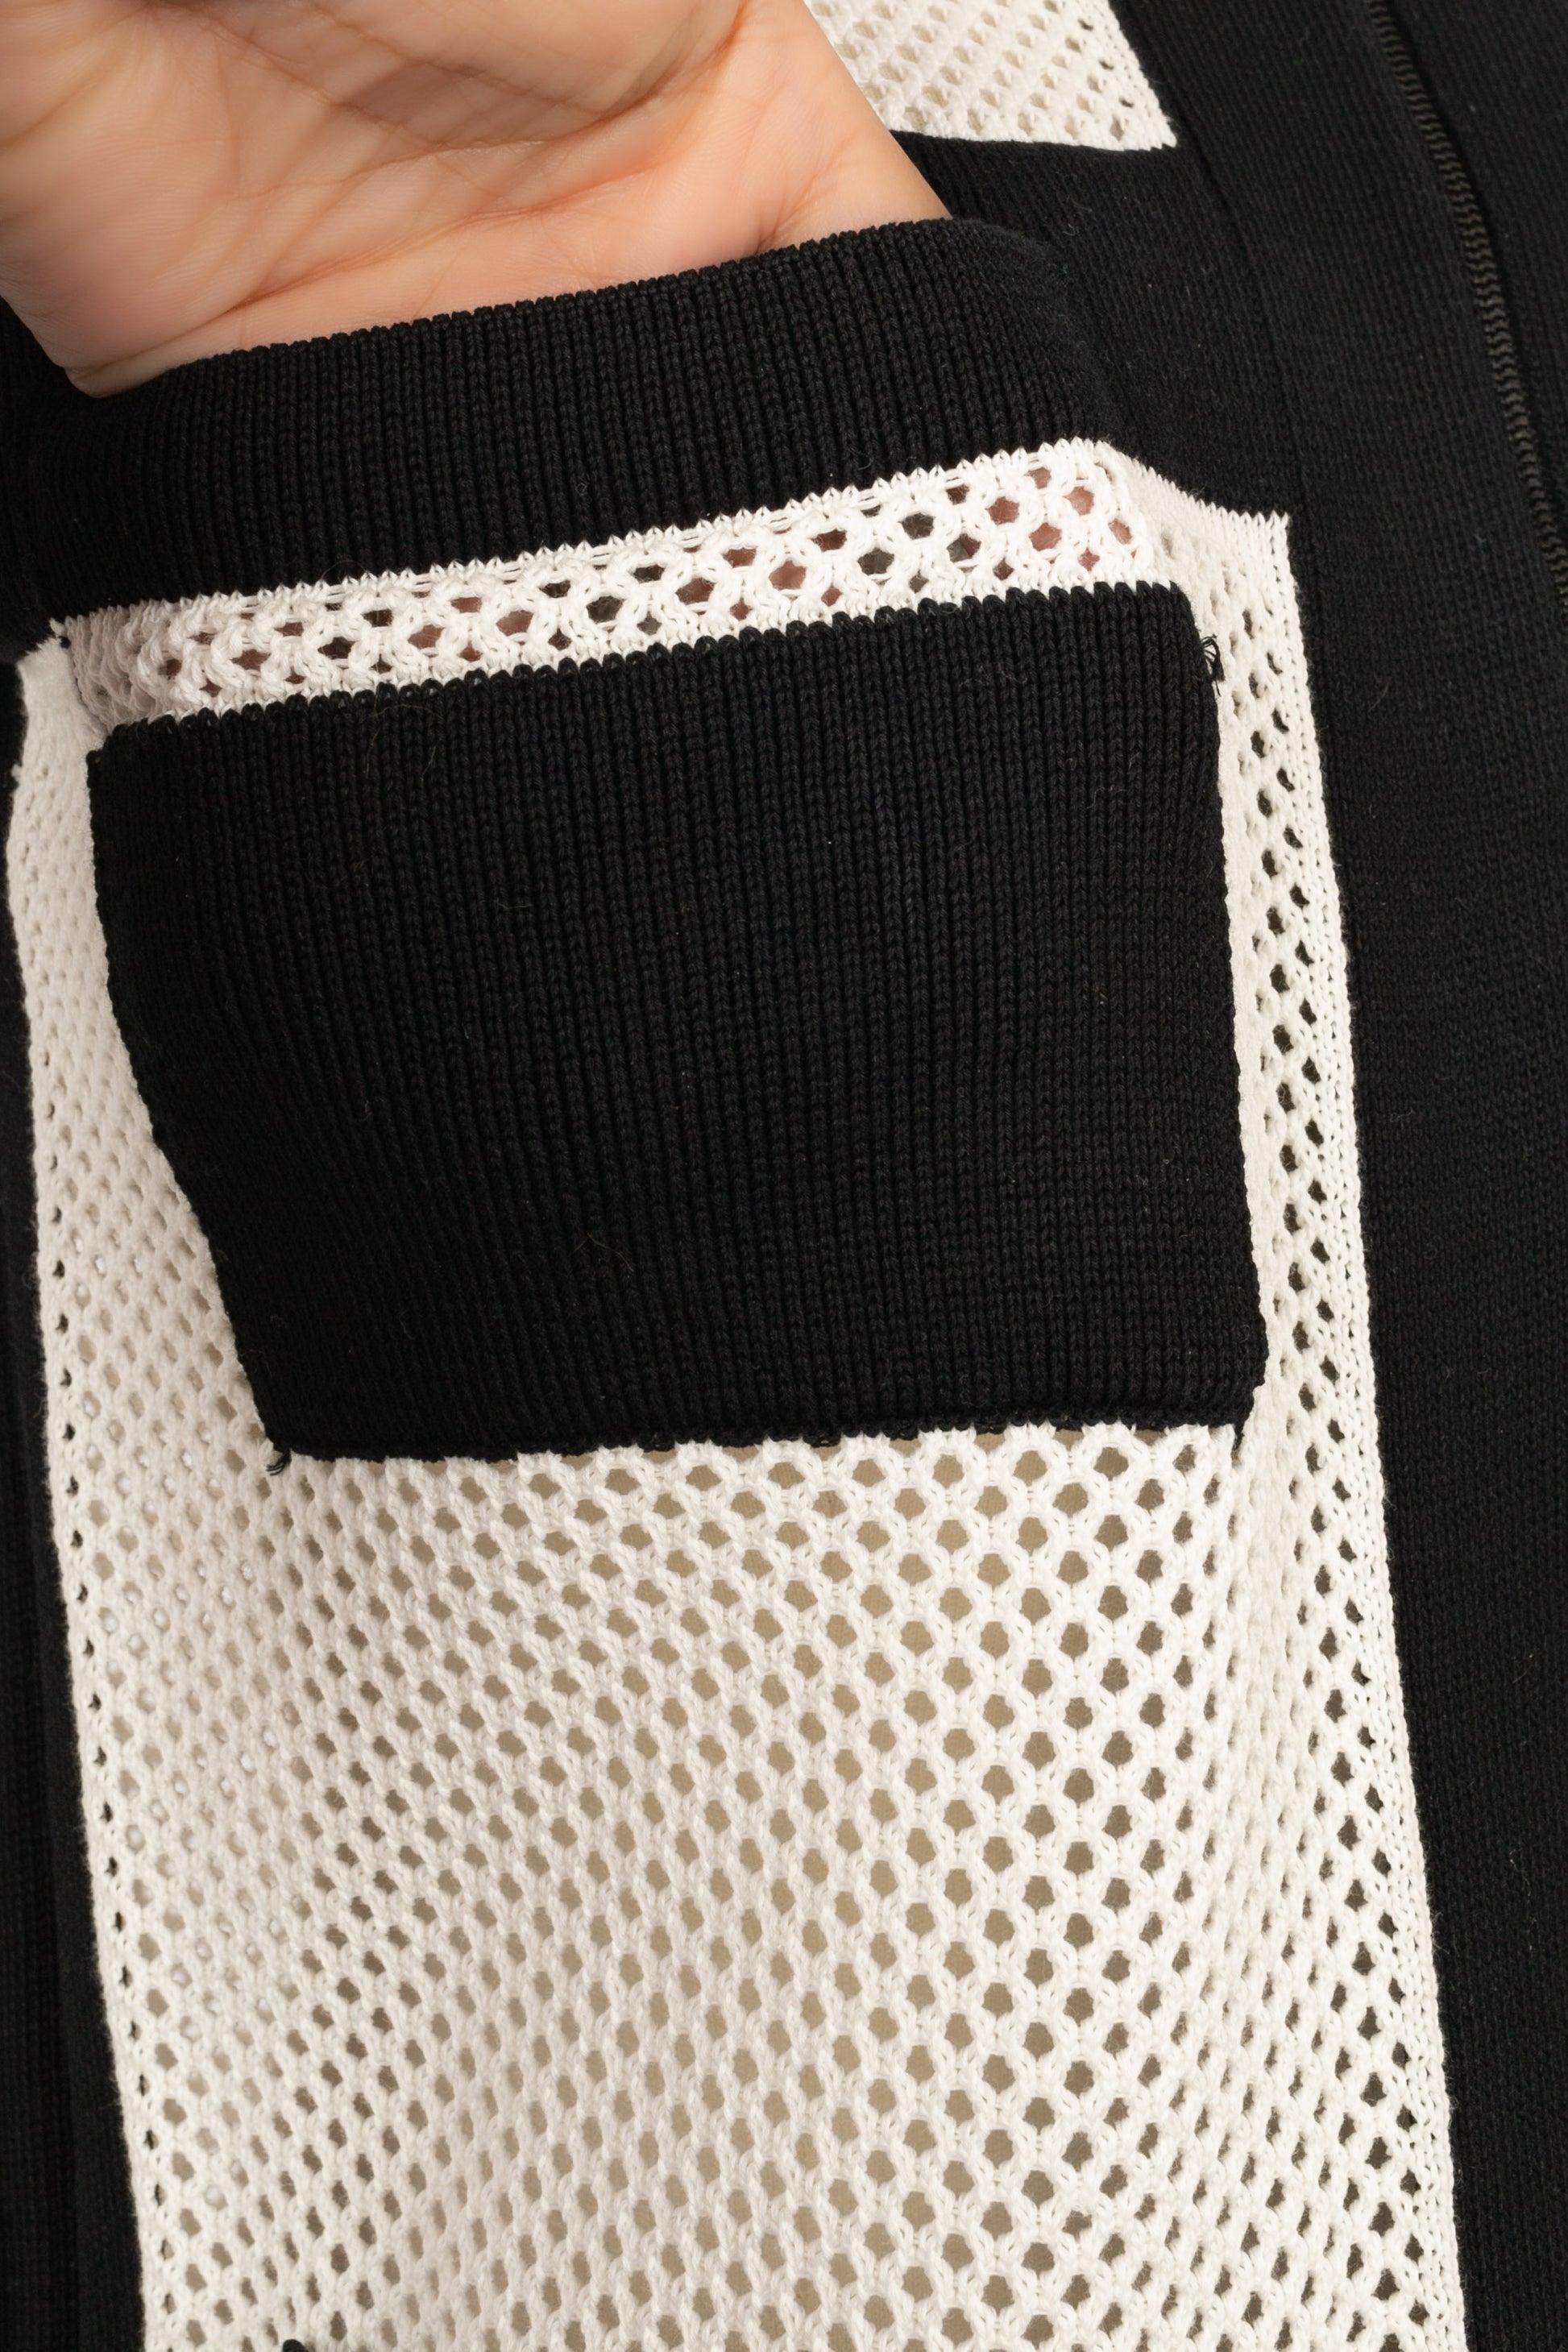 Chanel Jacket-Style Zipped Top in Black and White Mesh For Sale 1